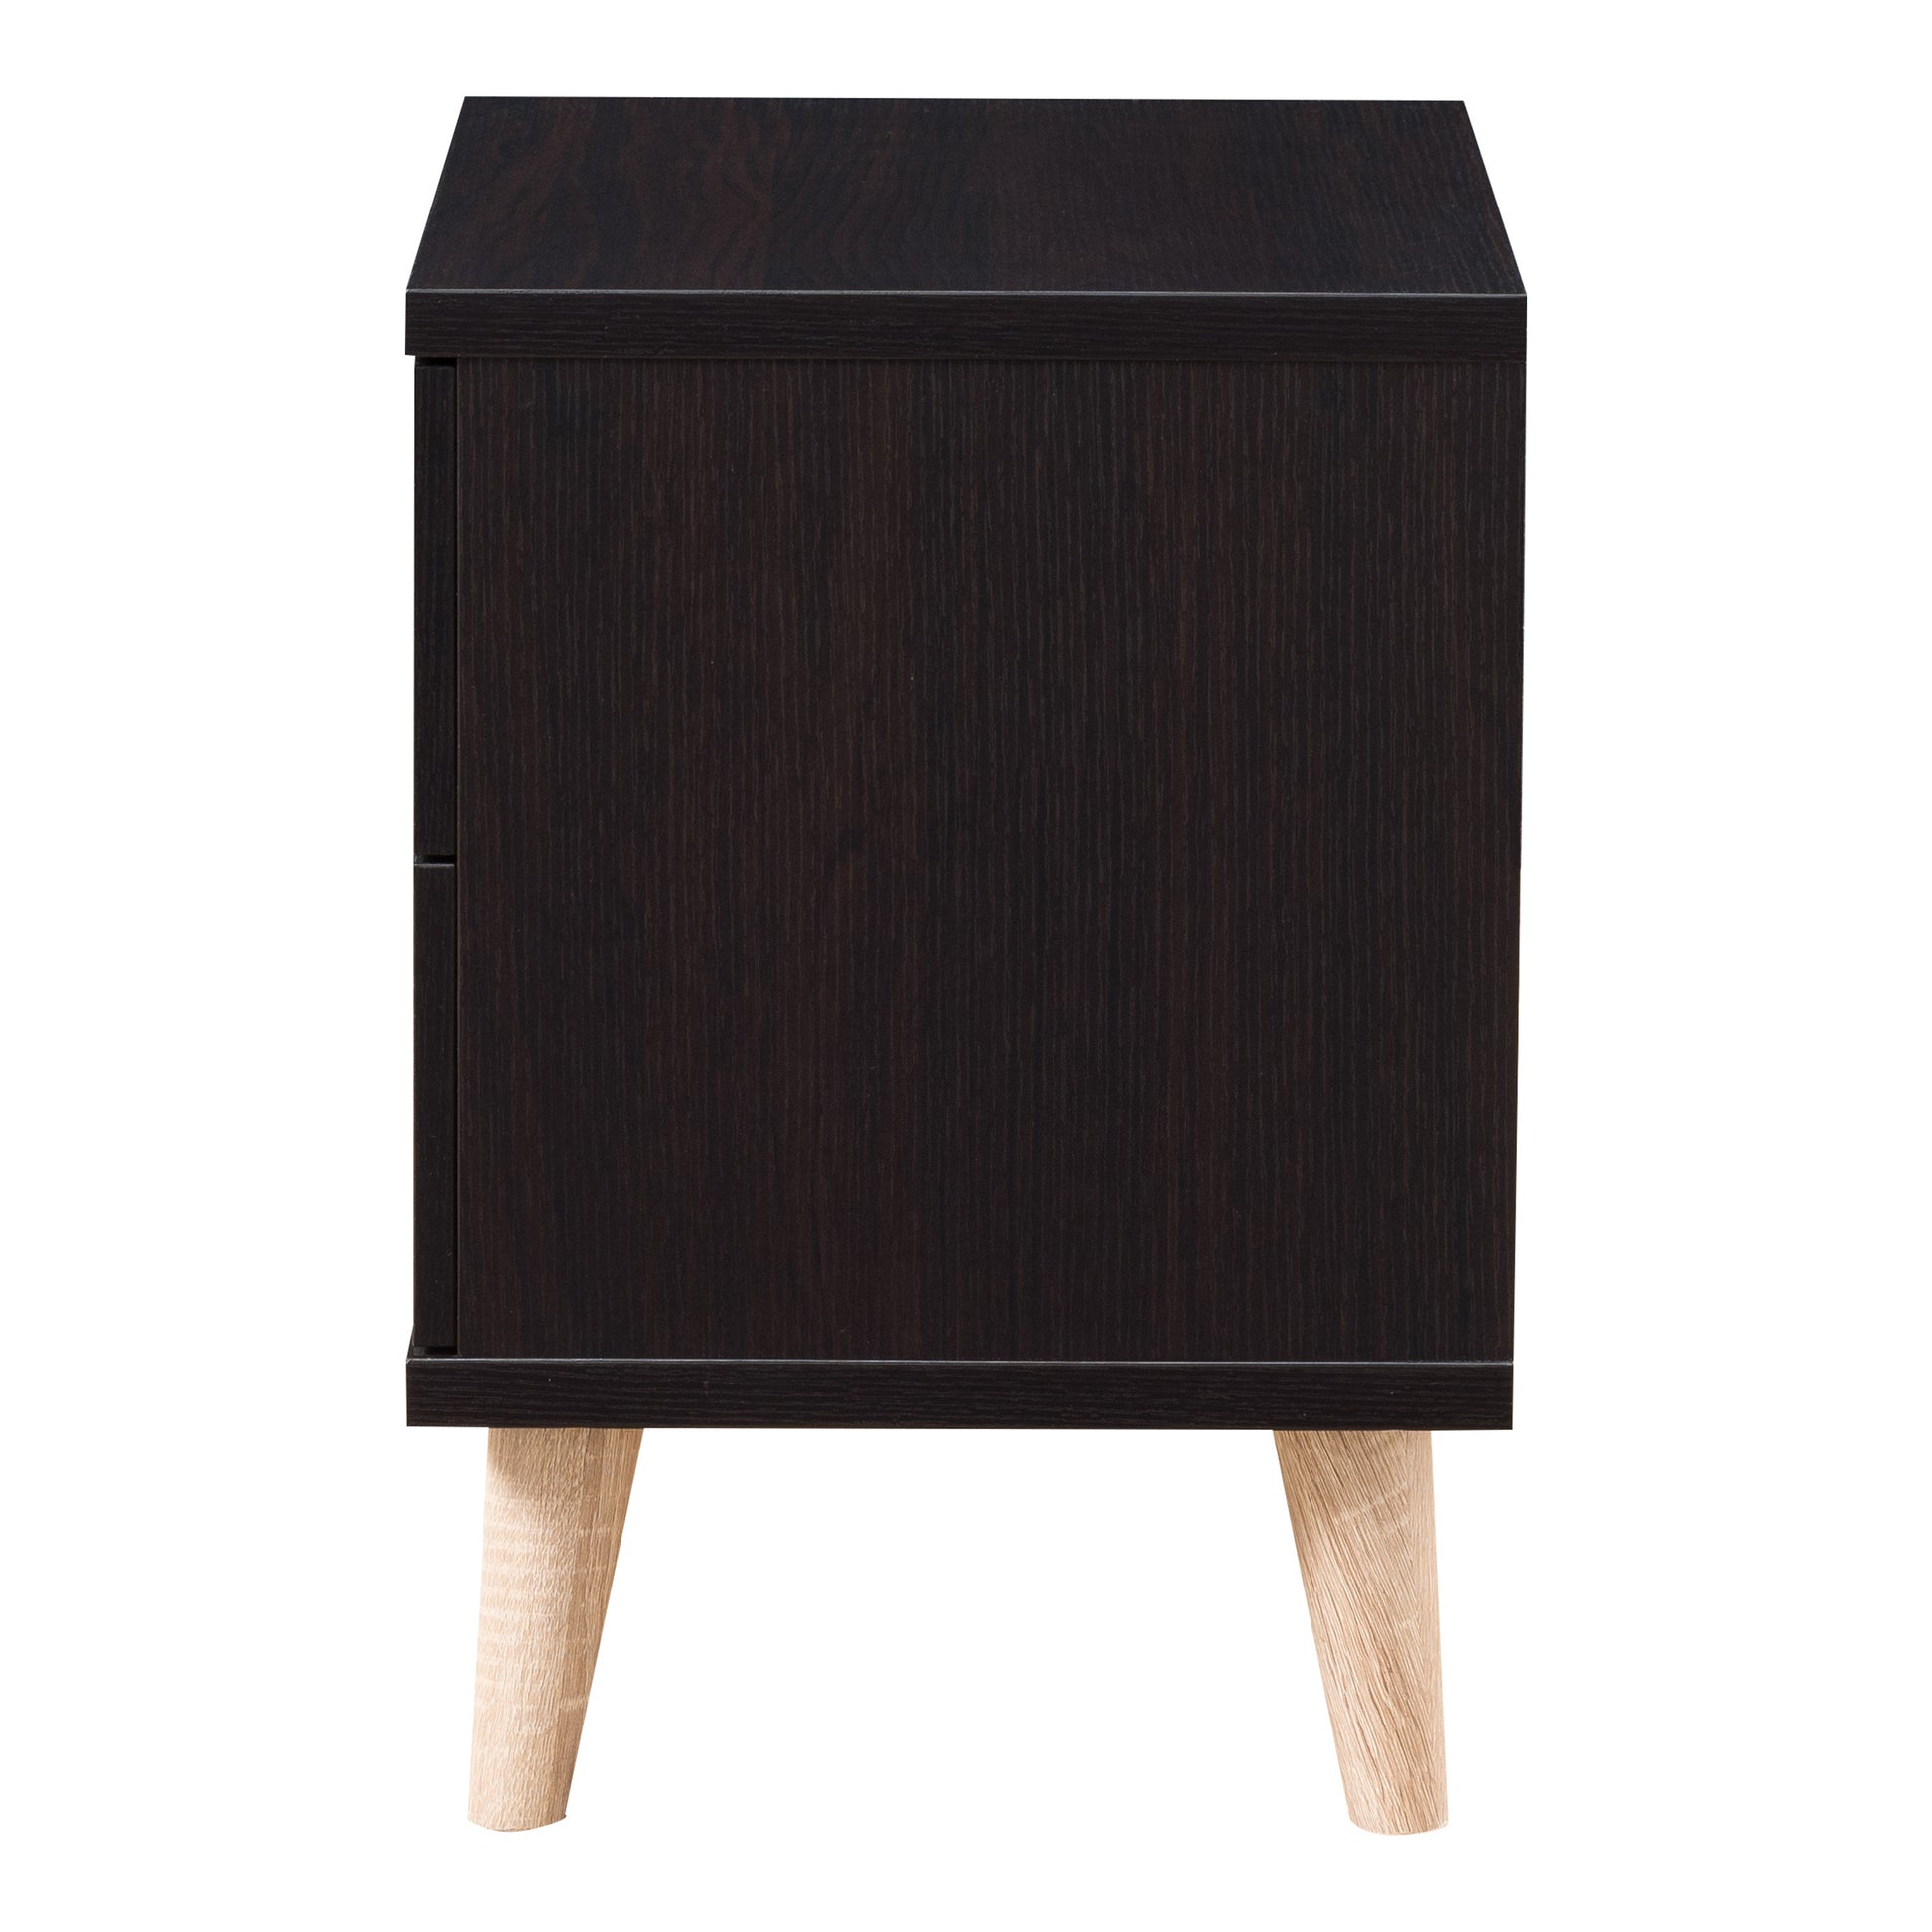 Front-facing side view of a mid-century modern cappuccino two-drawer nightstand on a white background